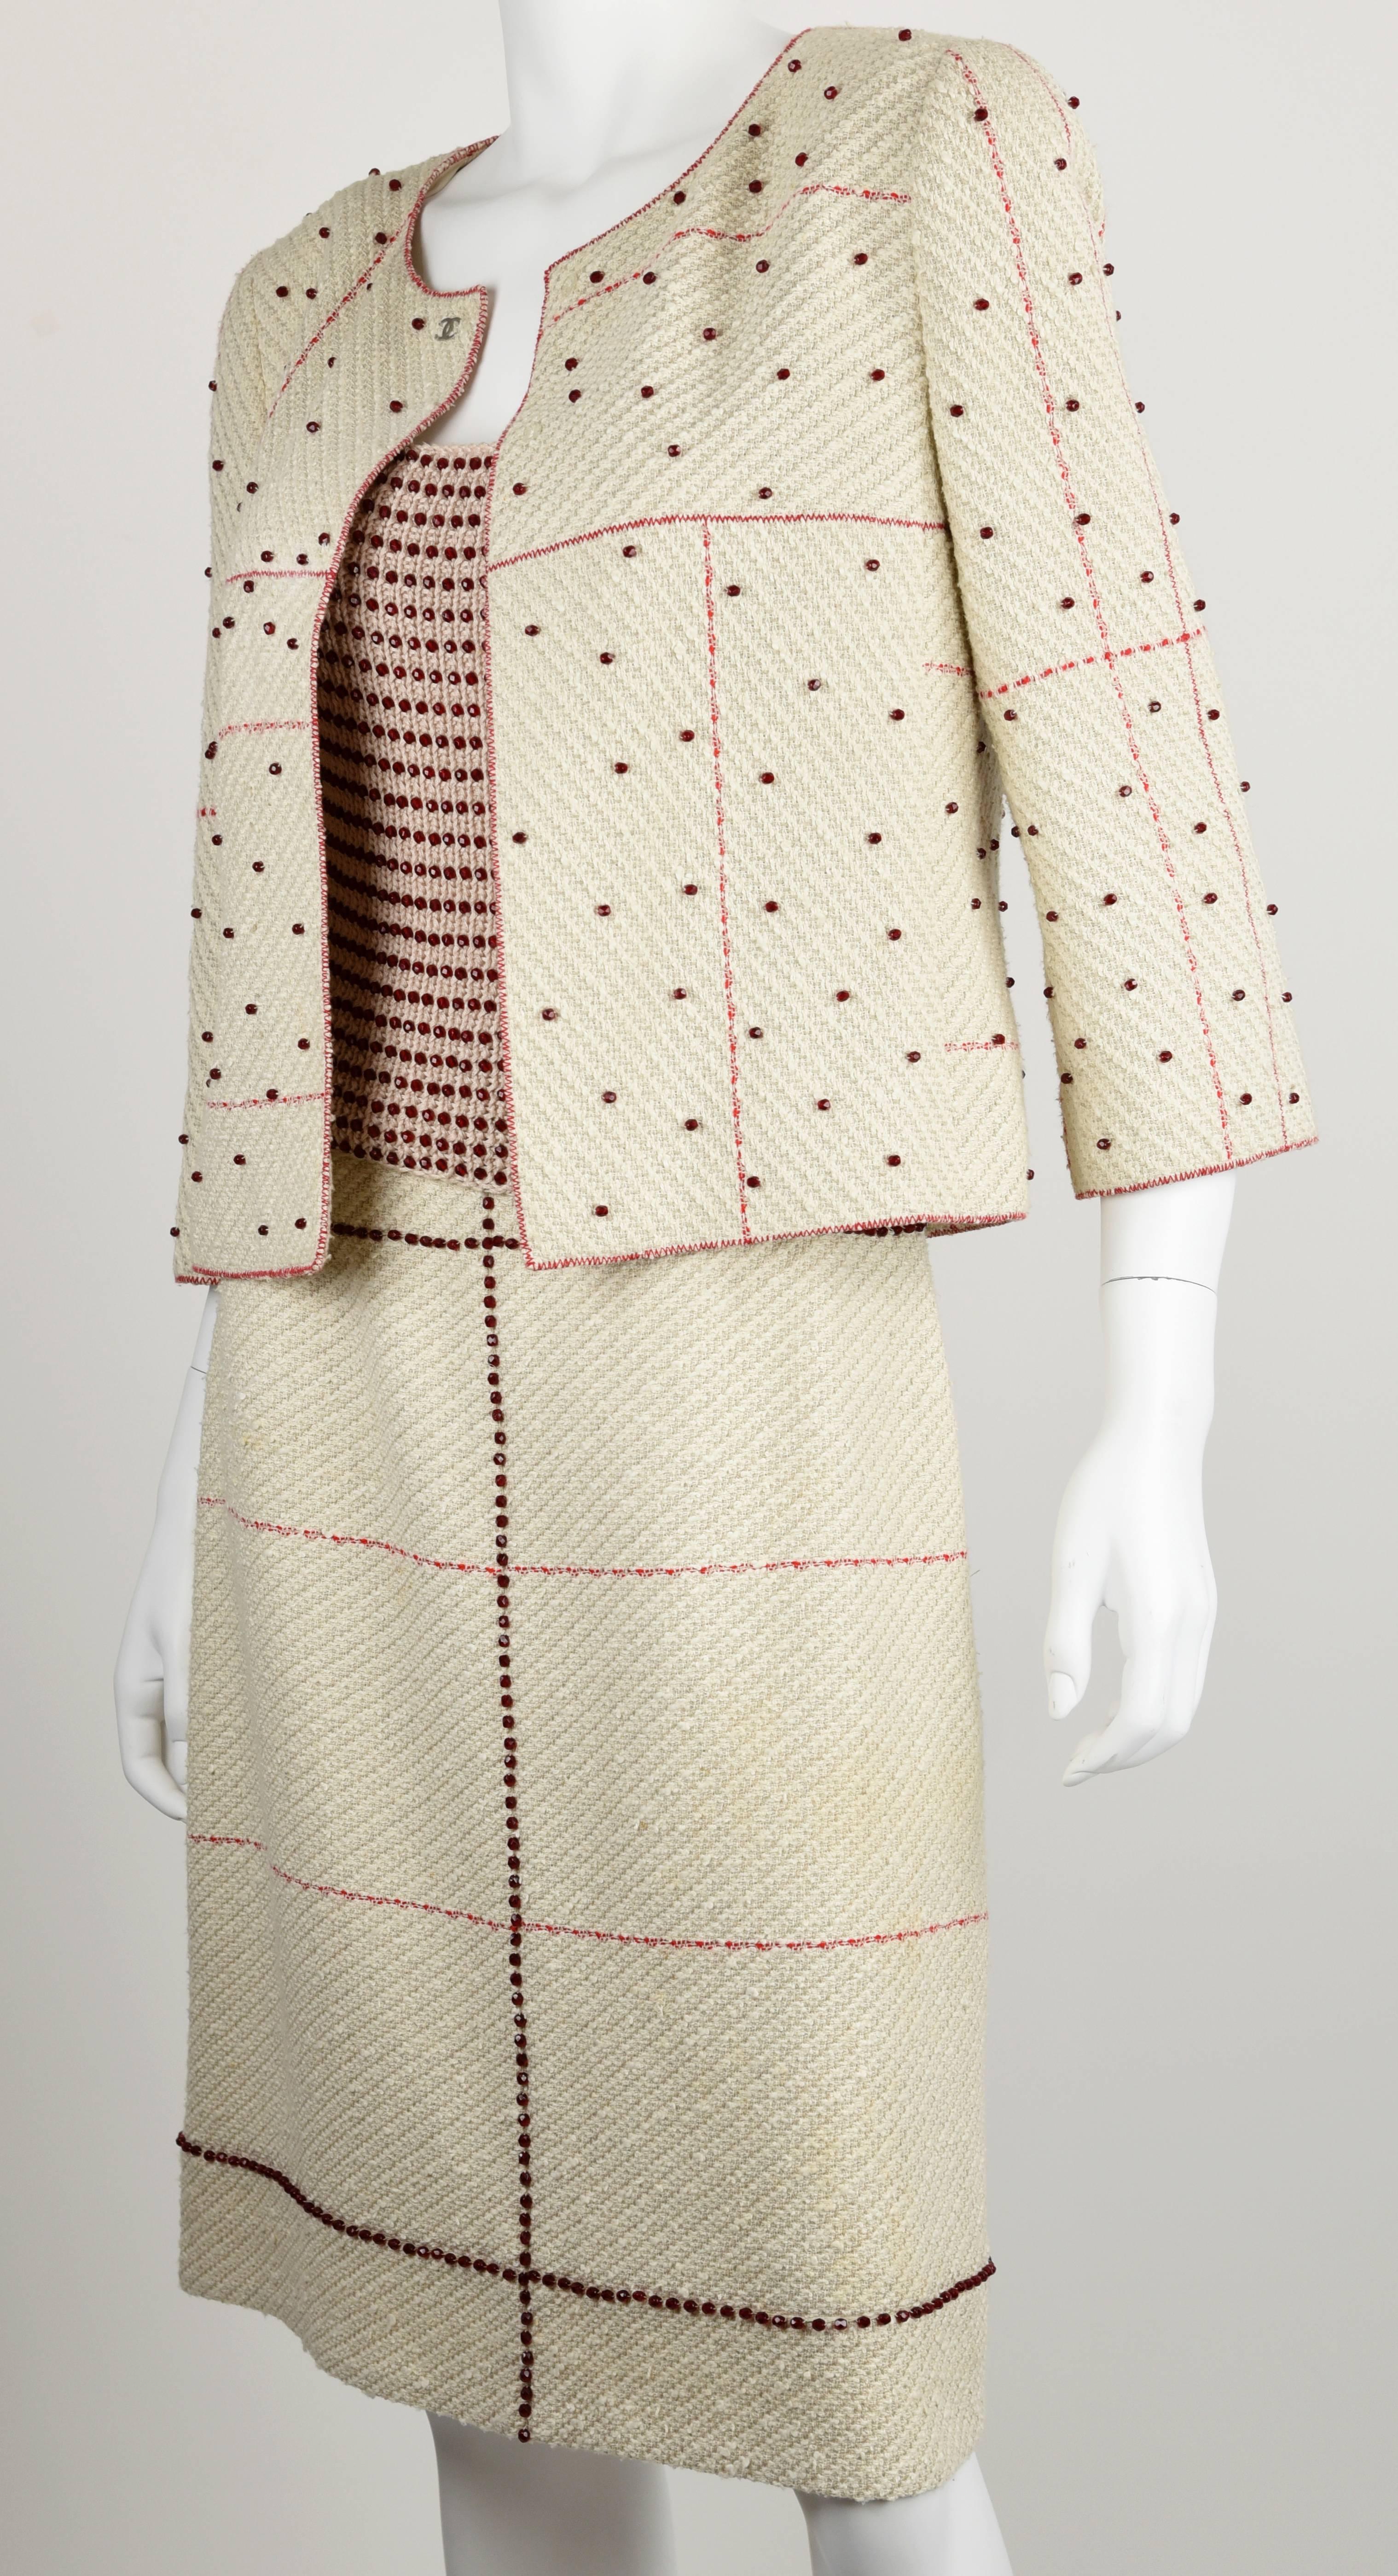 Thousands of red sparkling beads have been hand sewn on the jacket, the top and the skirt. The fabric is linen, cotton, nylon and wool, woven in a dimensional diagonal and Mondrian pattern The top has a surprising solid beading all the way around,